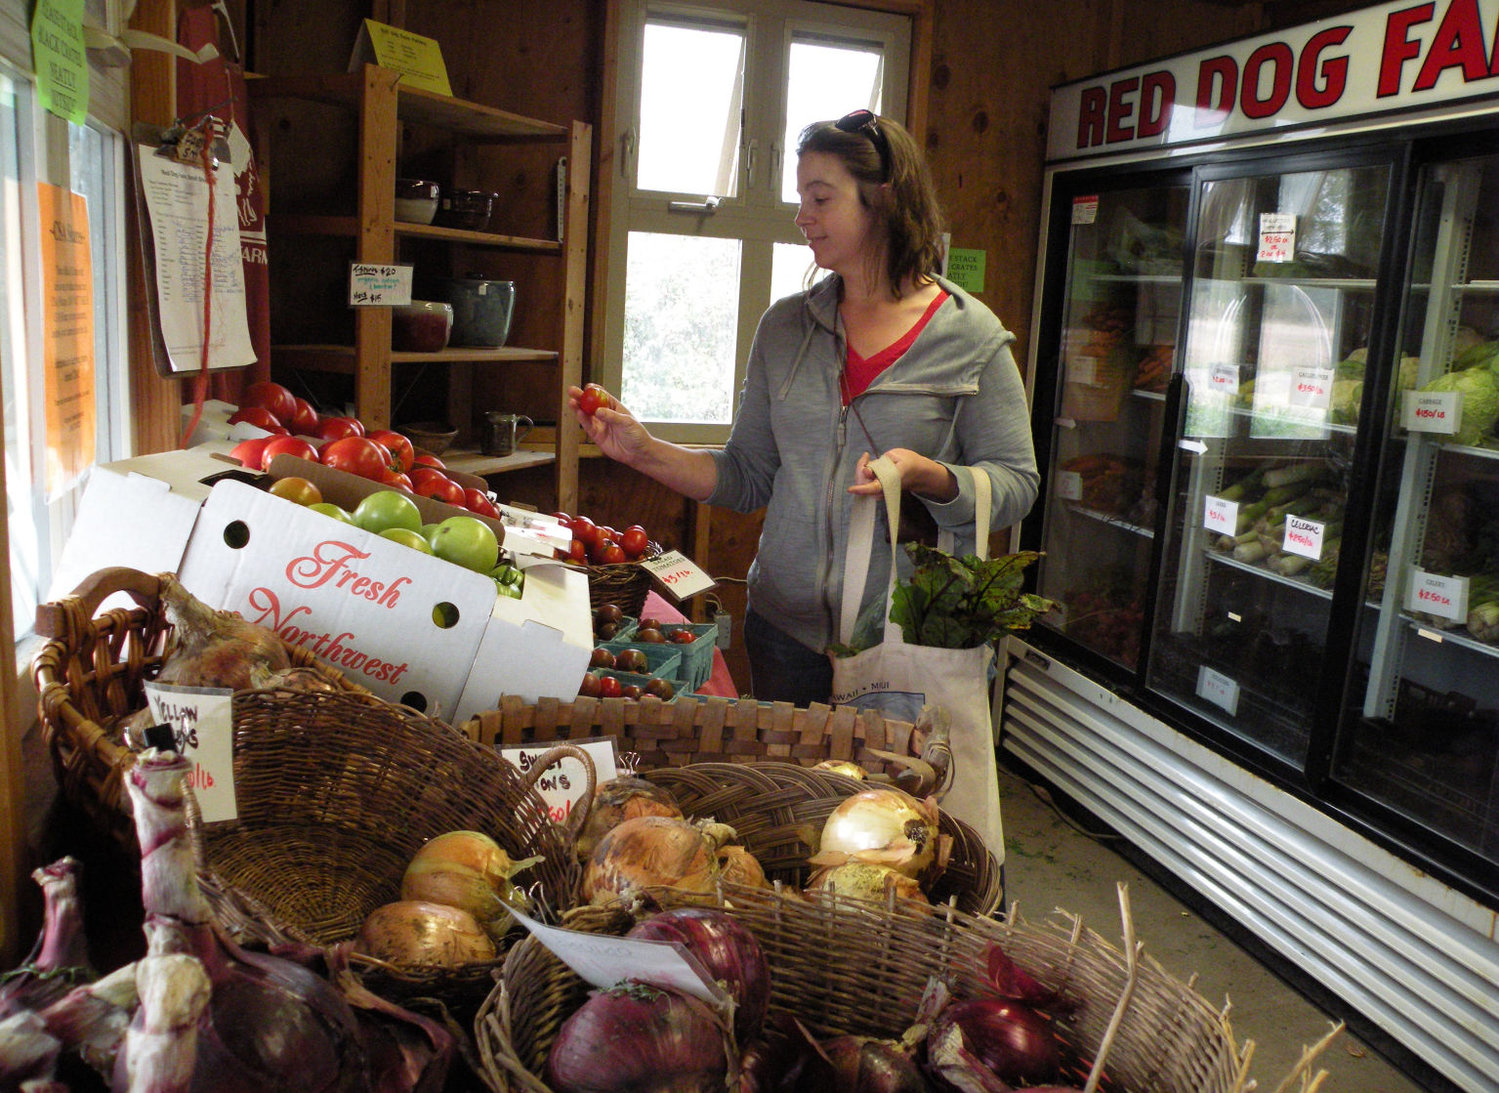 Pam Robbins of Chimacum stopped by Red Dog Farm Sept. 13 for a few fresh vegetables, as she does often. Red Dog's farm stand, at 406 Center Road, was recently written up in Rodale's "Organic Life" magazine as one of the top 50 farm stands in the United States. Photo by Allison Arthur